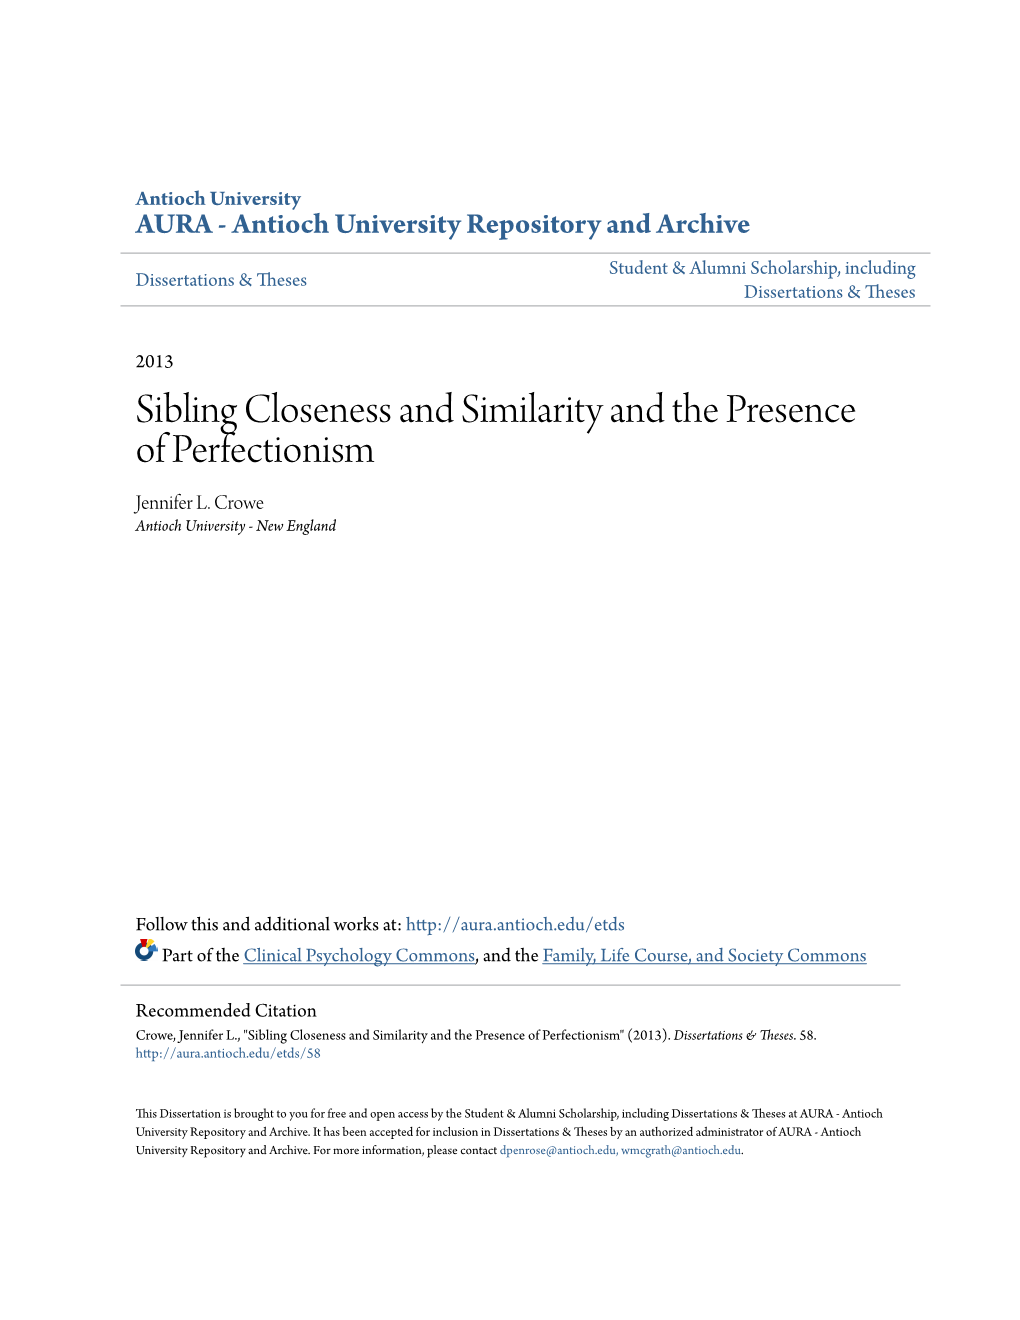 Sibling Closeness and Similarity and the Presence of Perfectionism Jennifer L